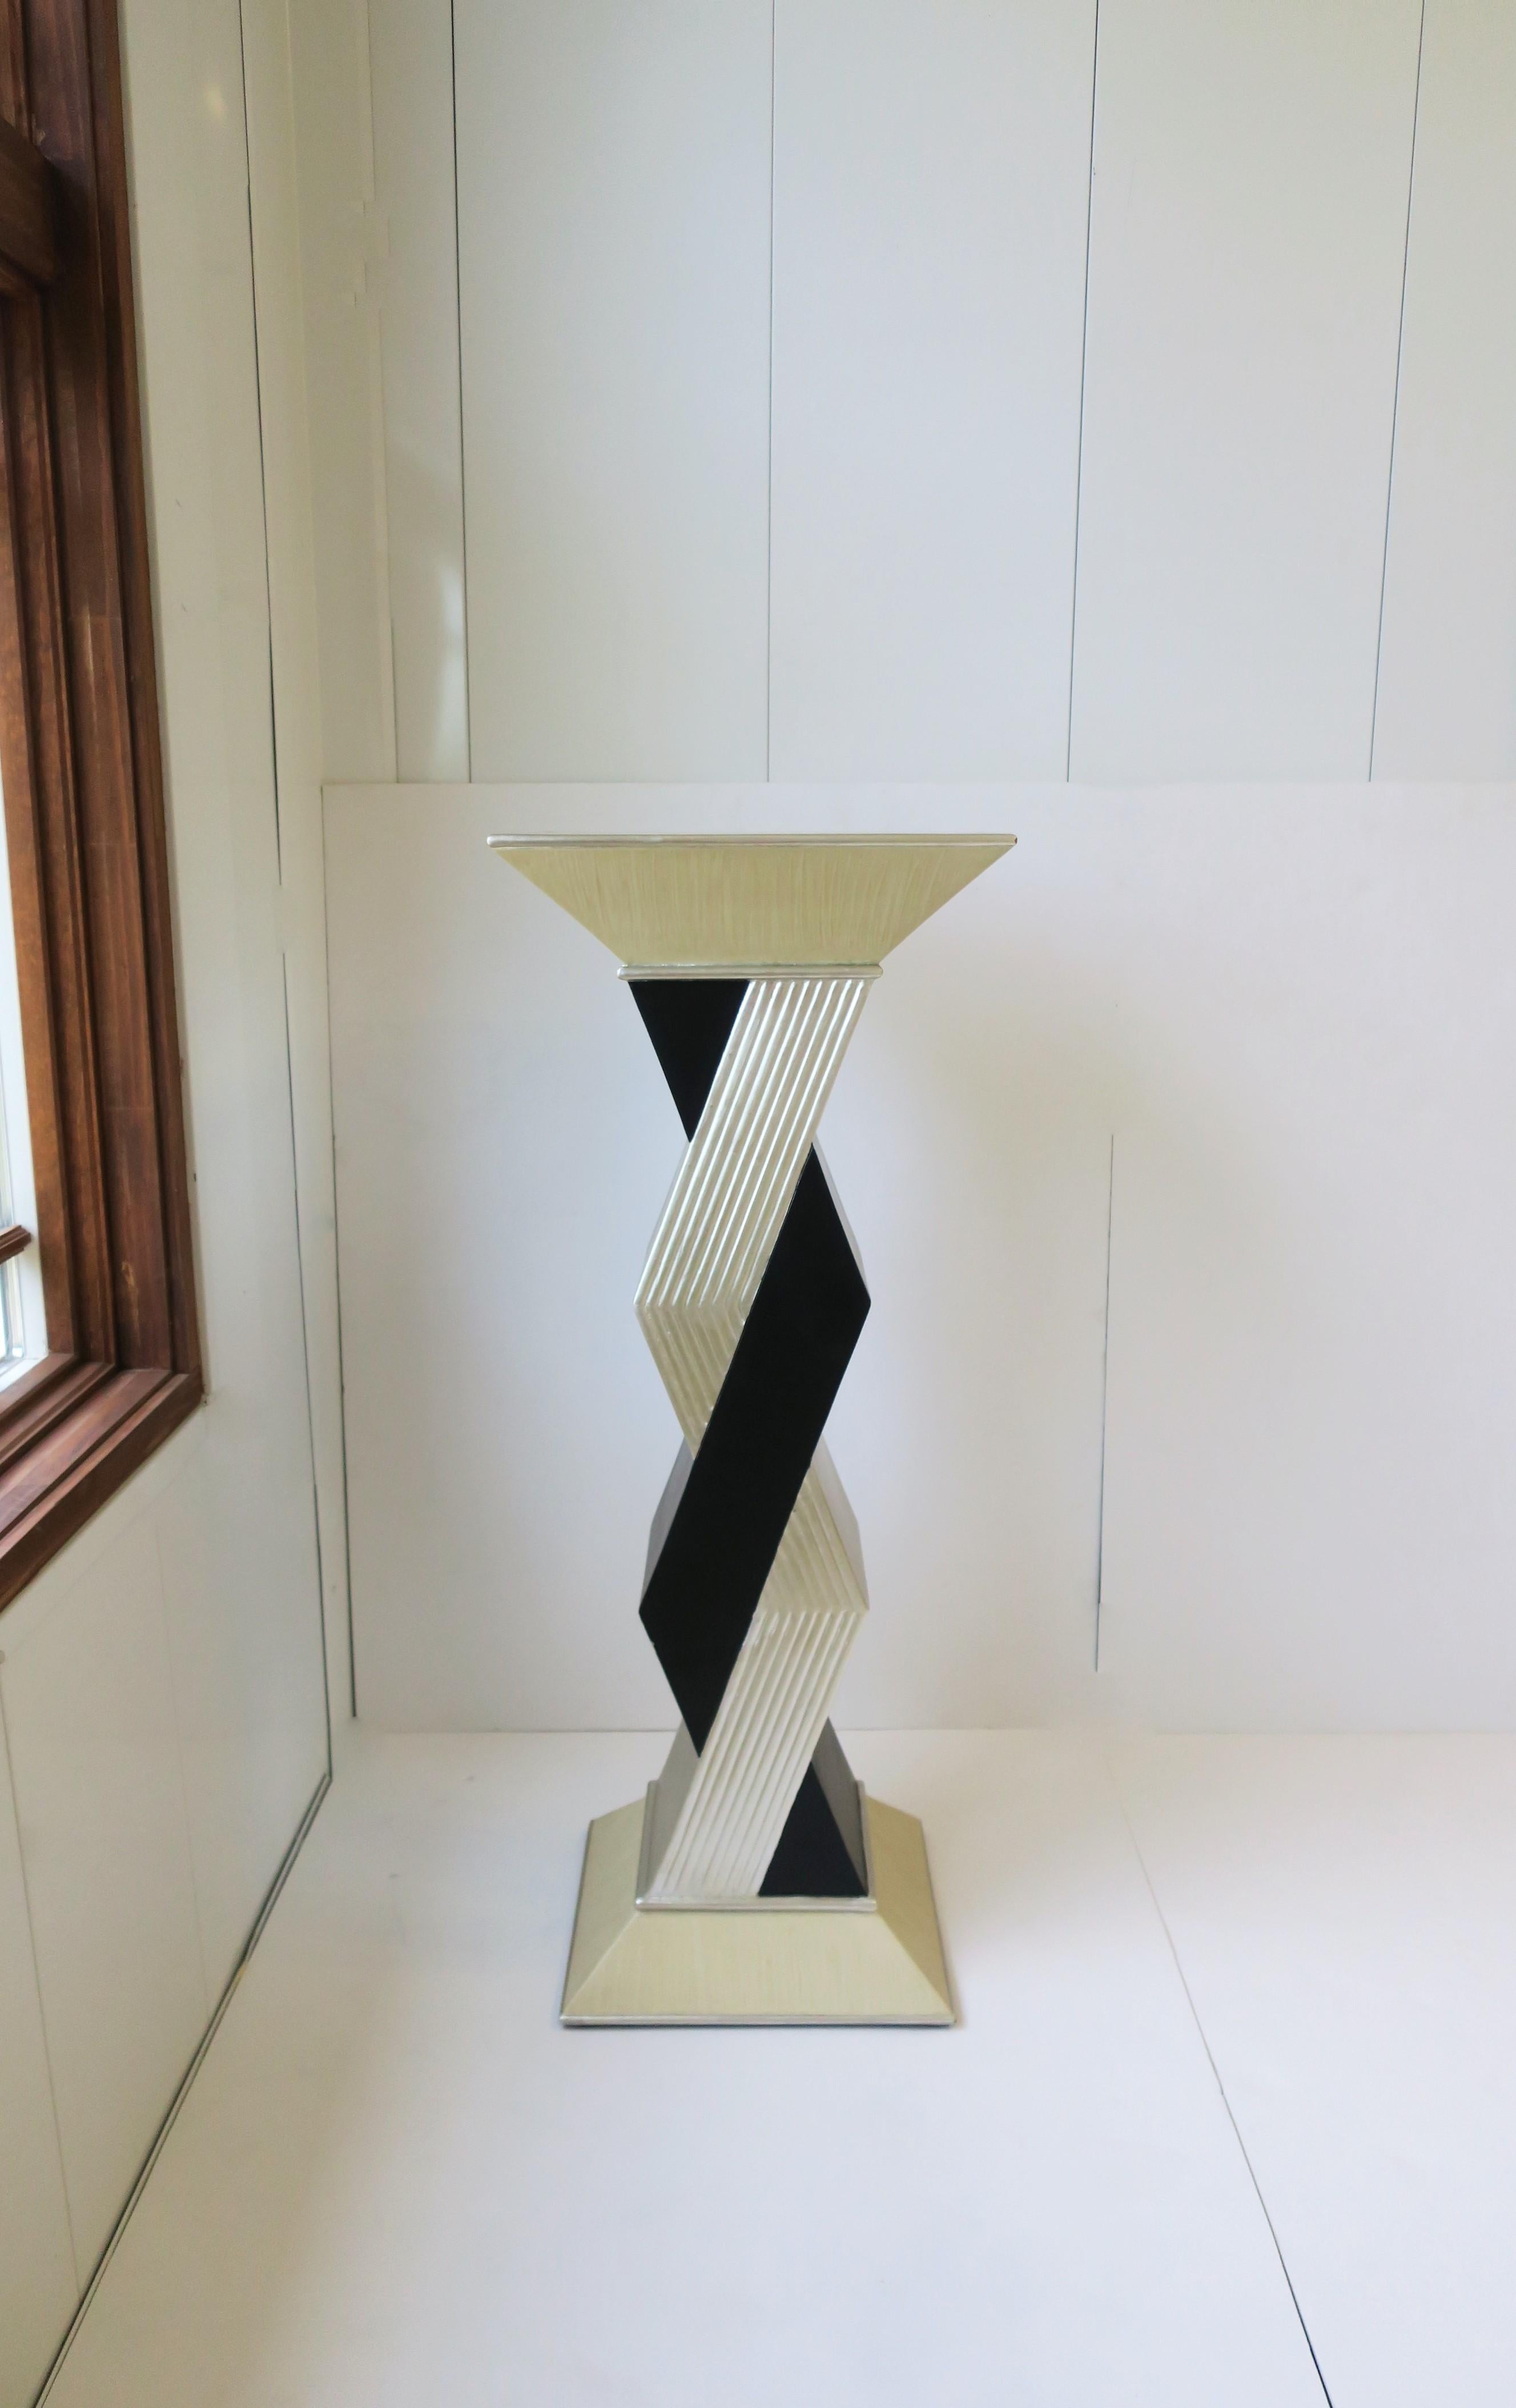 A Postmodern style pedestal column pillar stand in matte black and silver-gilt style zig-zag design, late 20th century, circa 1990s. Top and base area are a light tan hue finished with a silver edge. A great piece for sculpture, plant, display of